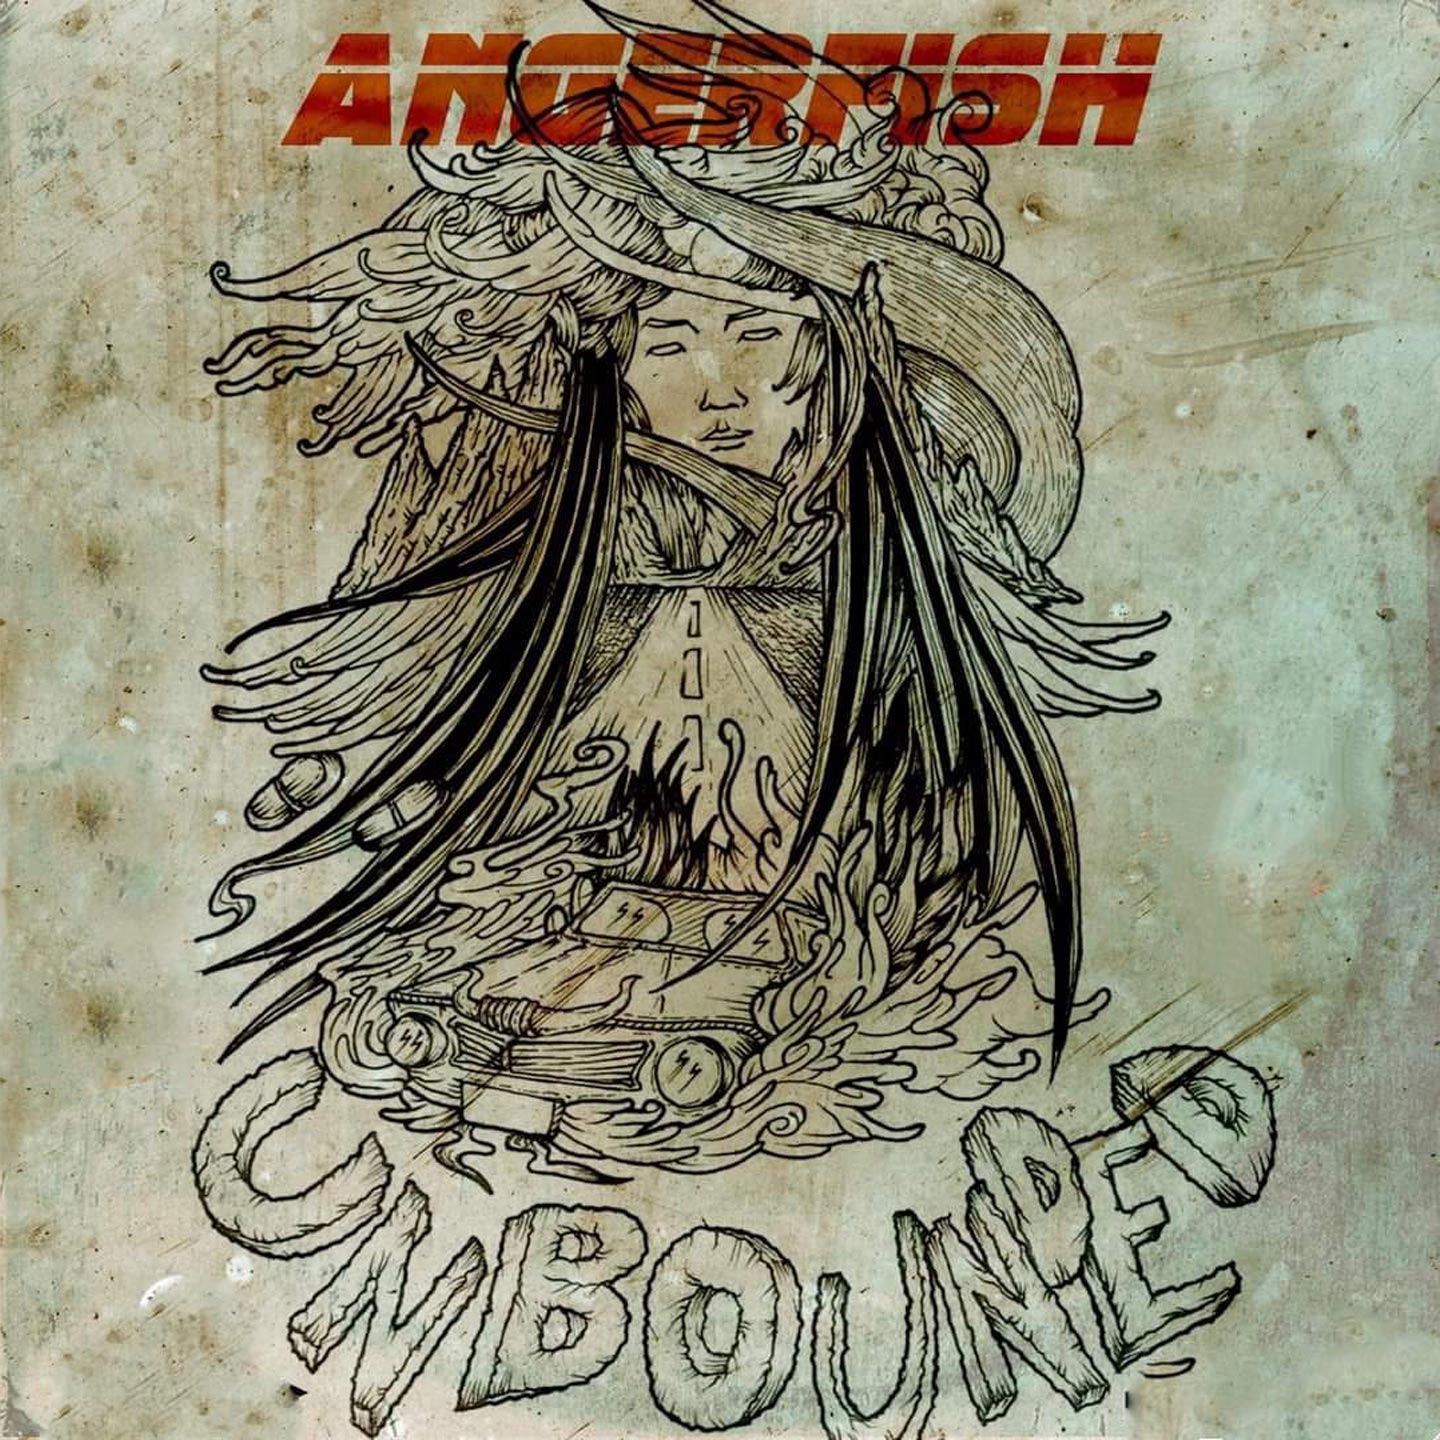 Angerfish – “Unbounded”